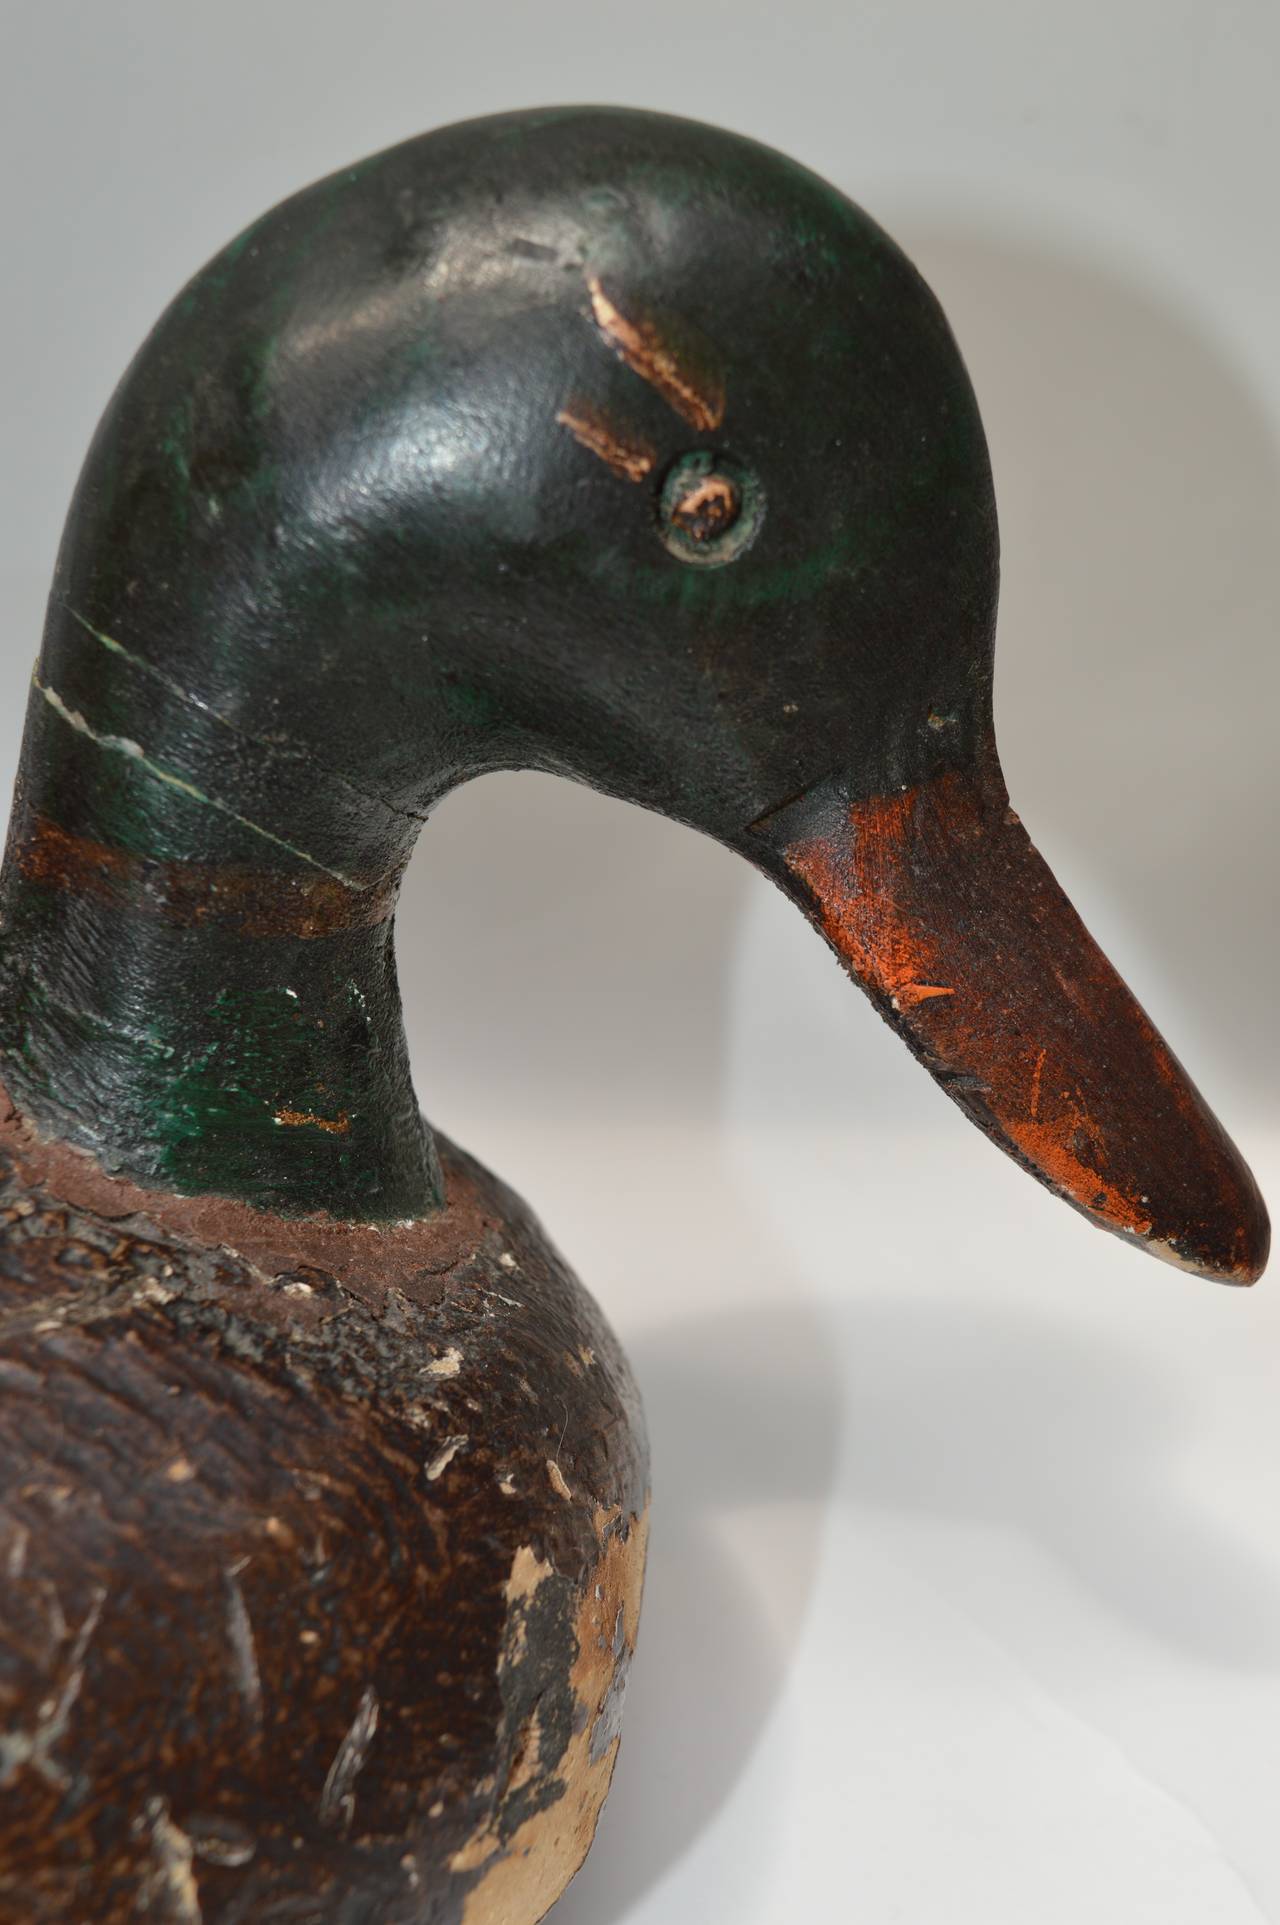 A very decorative Folk Art duck decoy carved from cork and painted in a wonderfully primative manner.